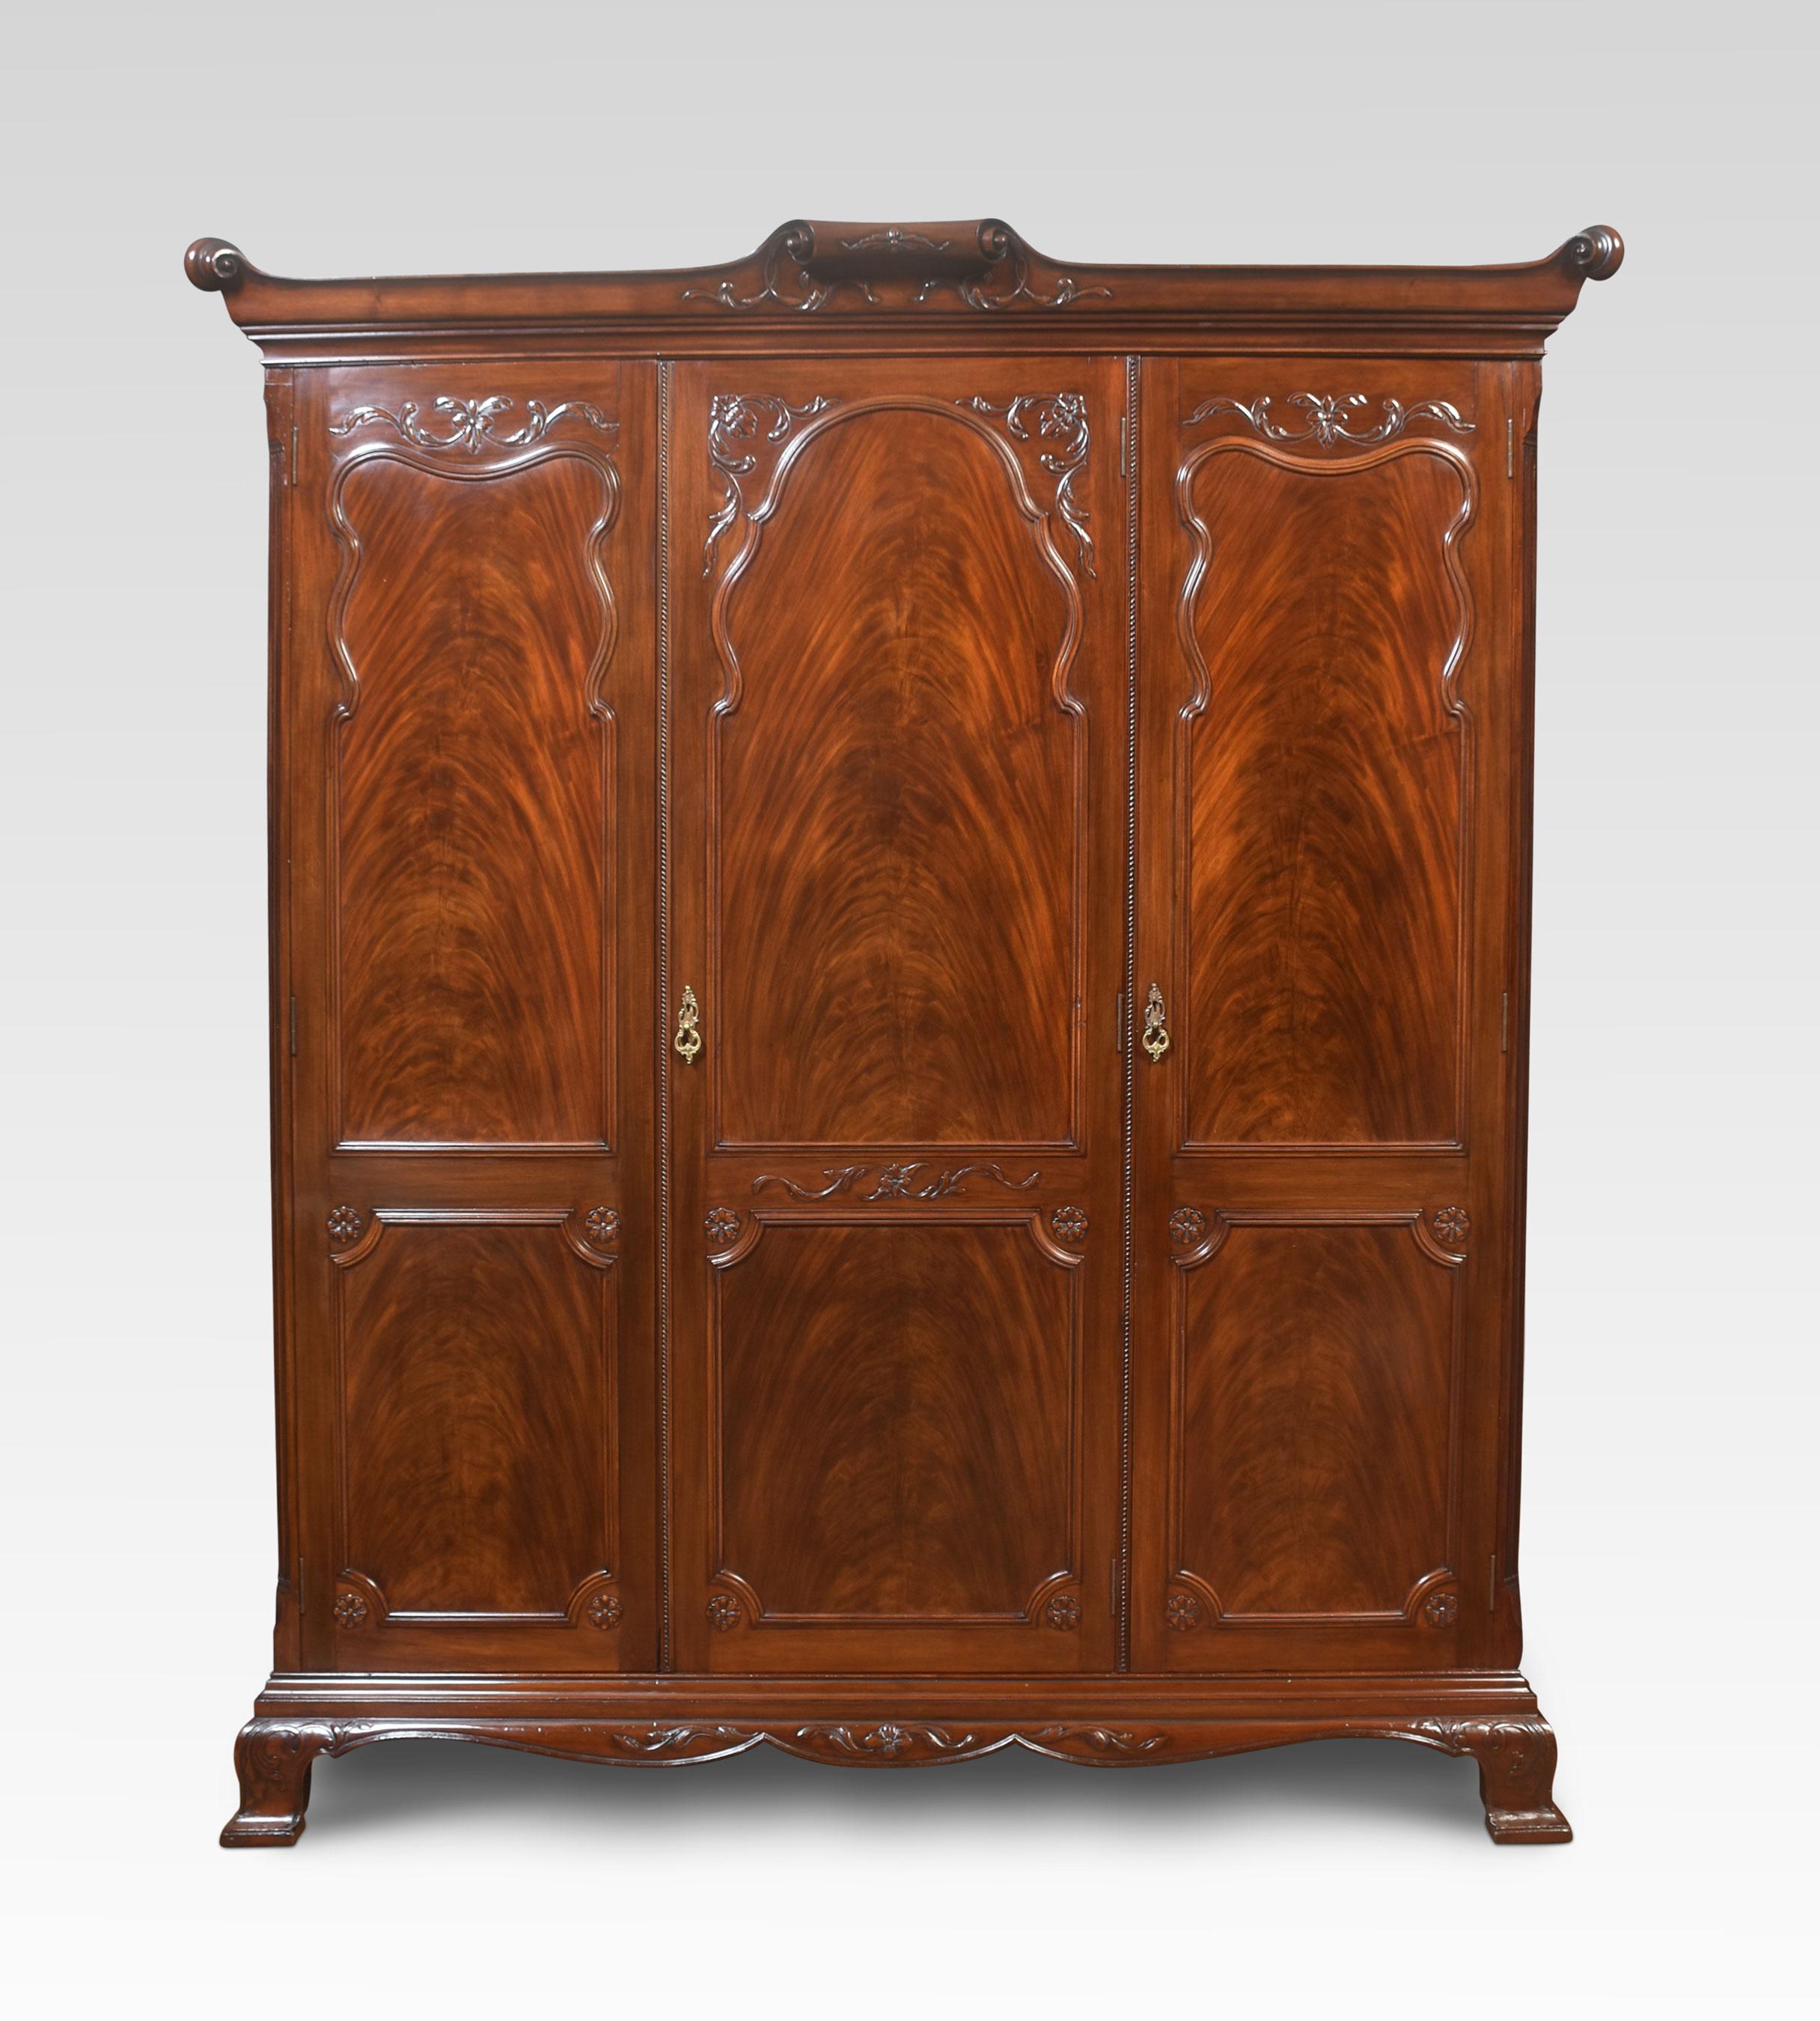 Mahogany three-door wardrobe, the moulded scrolling cornice above three long well figured panelled mahogany doors, opening to reveal large hanging area and shelves above. All raised up on plinth base terminating in bracket feet.
Dimensions
Height